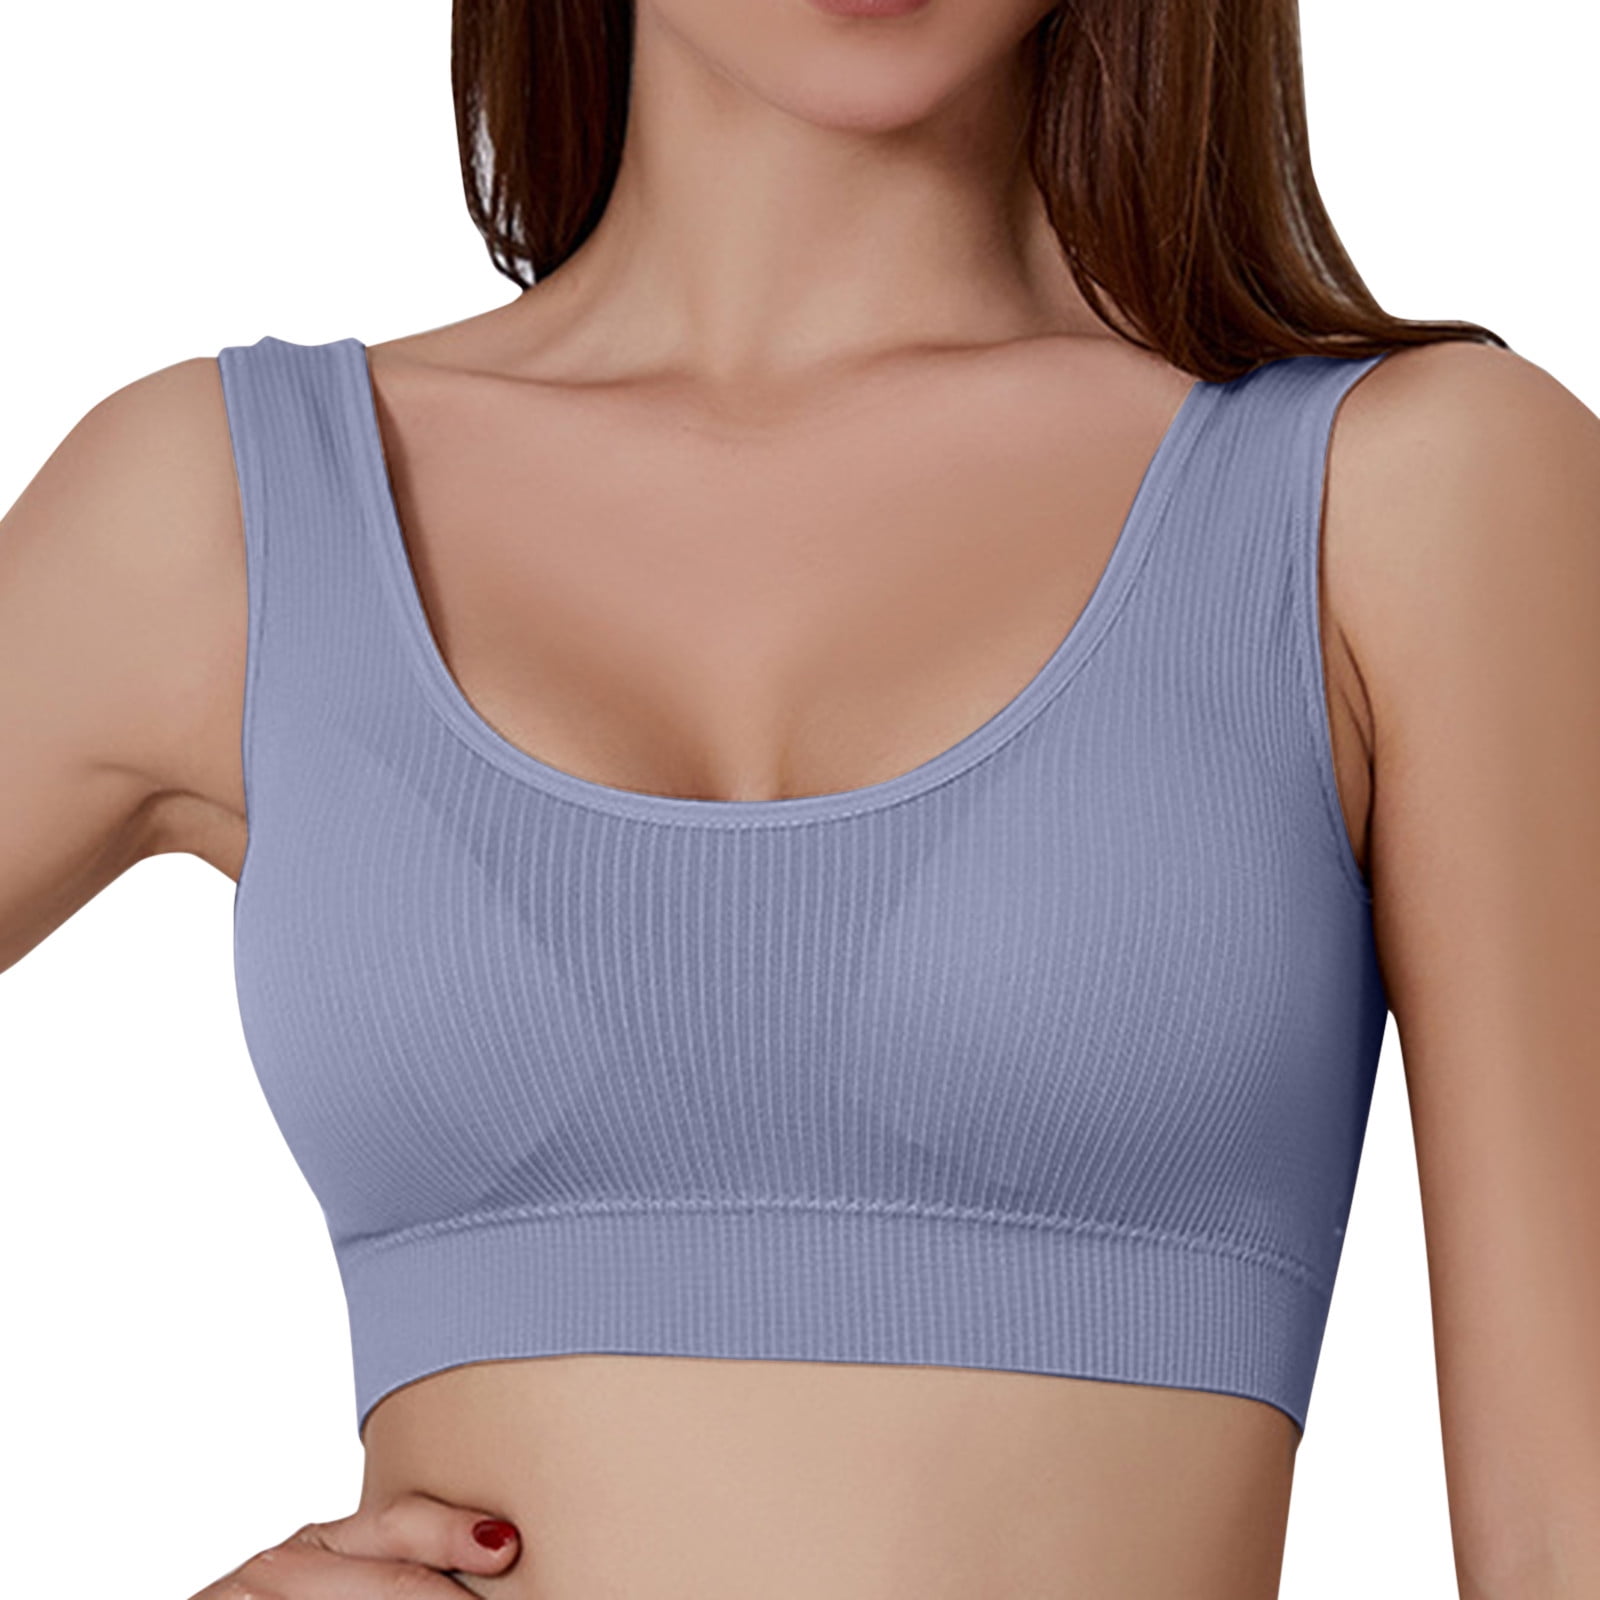 CAICJ98 Bras For Women Yoga Tank Tops for Women Built in Shelf Bra B/C Cups  Strappy Back Activewear Workout Compression Tops Blue,M 